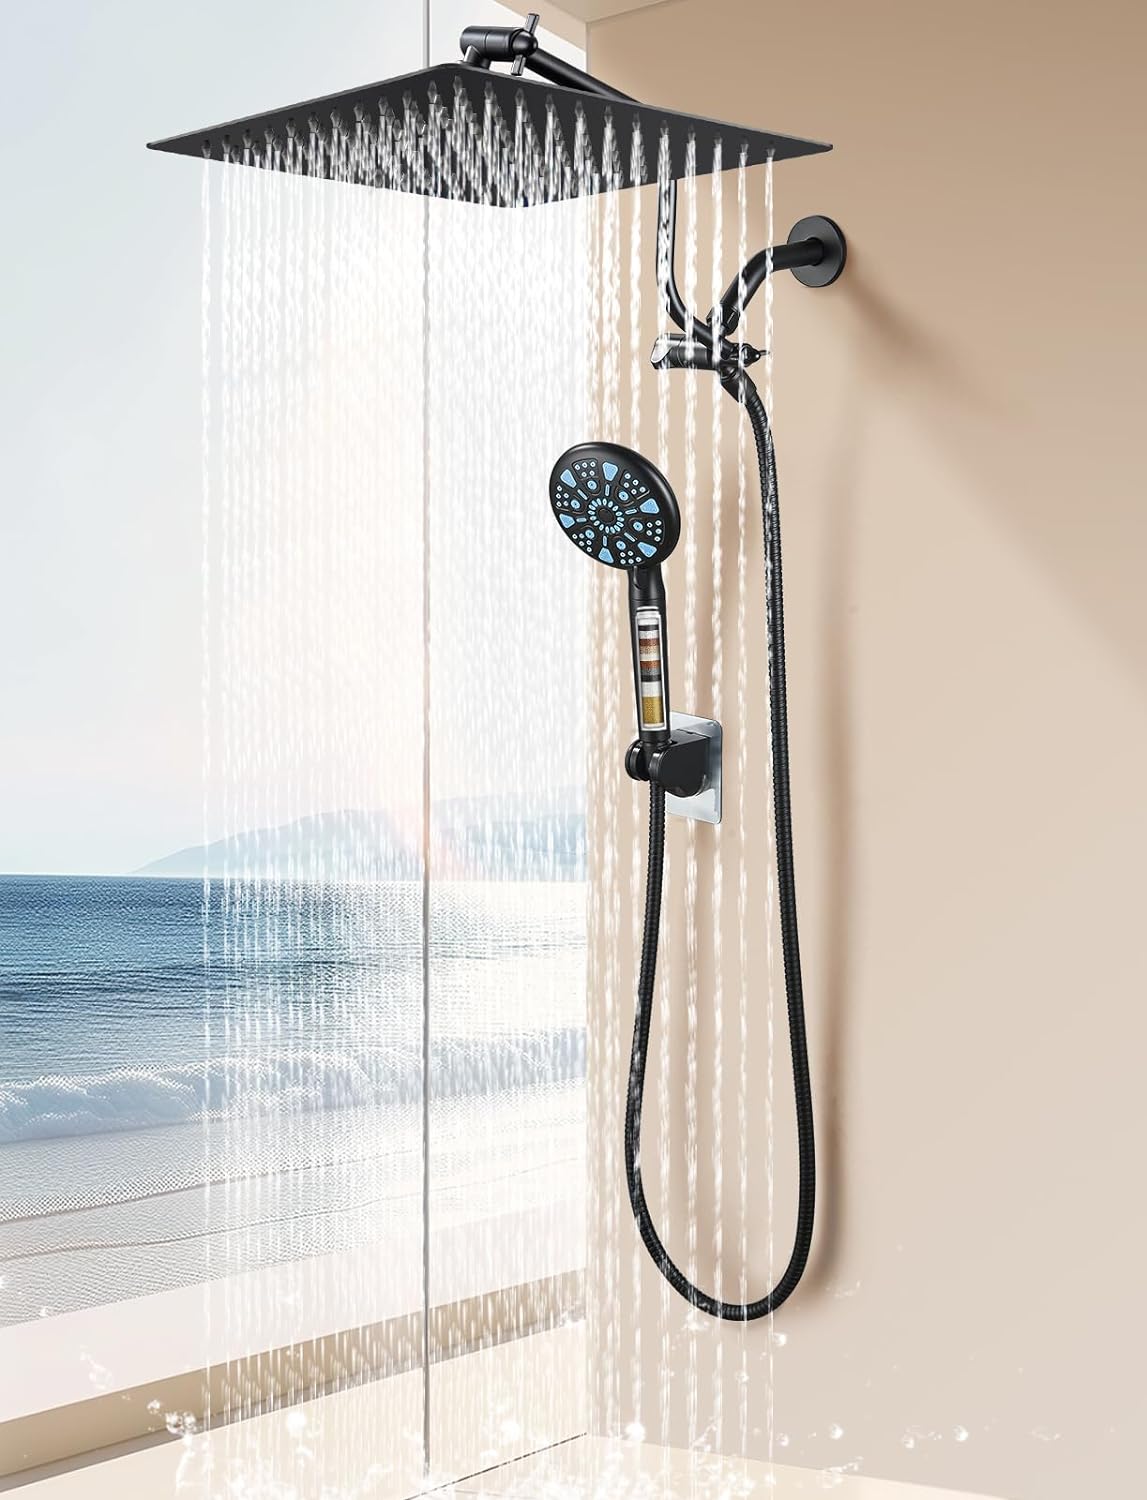 Cobbe 12 Inch All Metal 3-Way Rain Shower Head, High Pressure Shower Head, Dual Shower Heads with Handheld Spray Combo - Upgrade Extension Arm Height Adjustable - 9 Spray Filtered Shower Head, Black